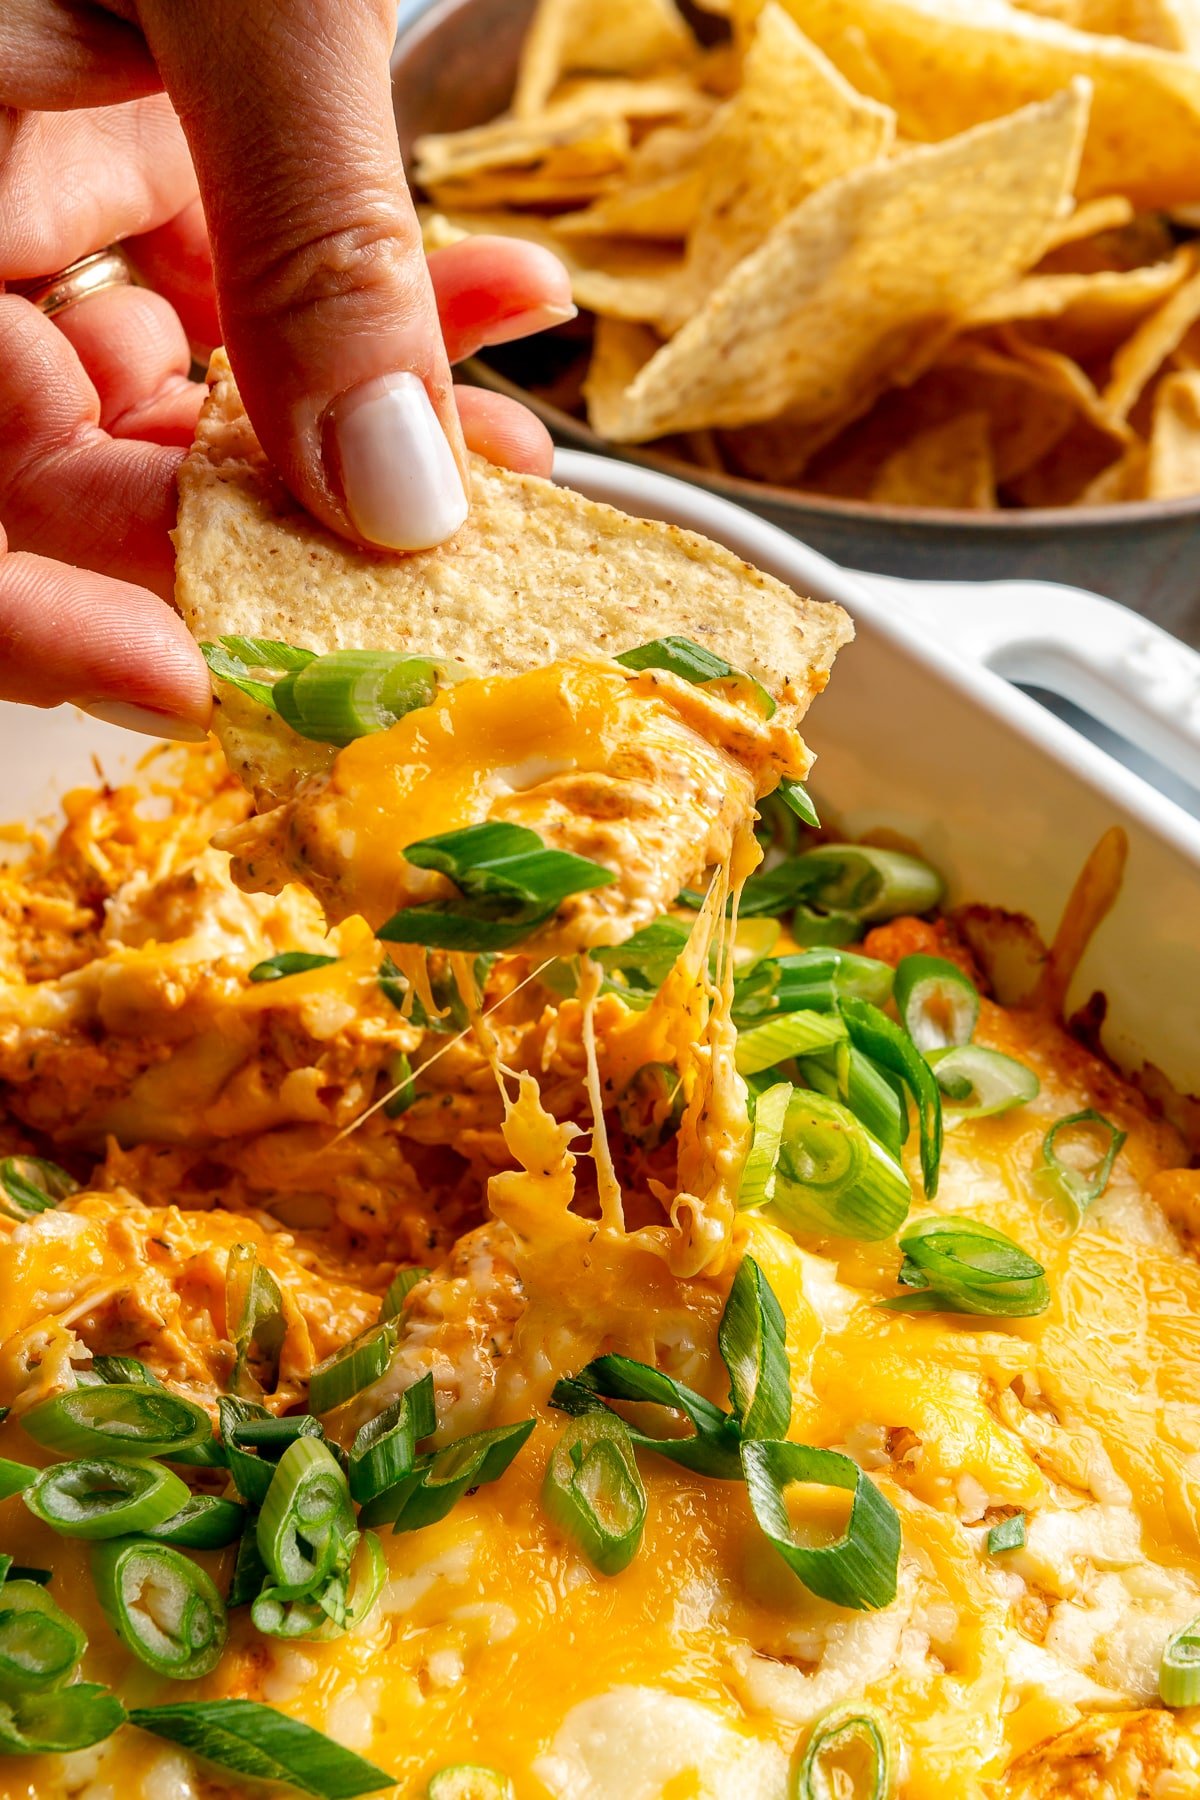 A person using a tortilla chip to scoop up buffalo chicken dip.